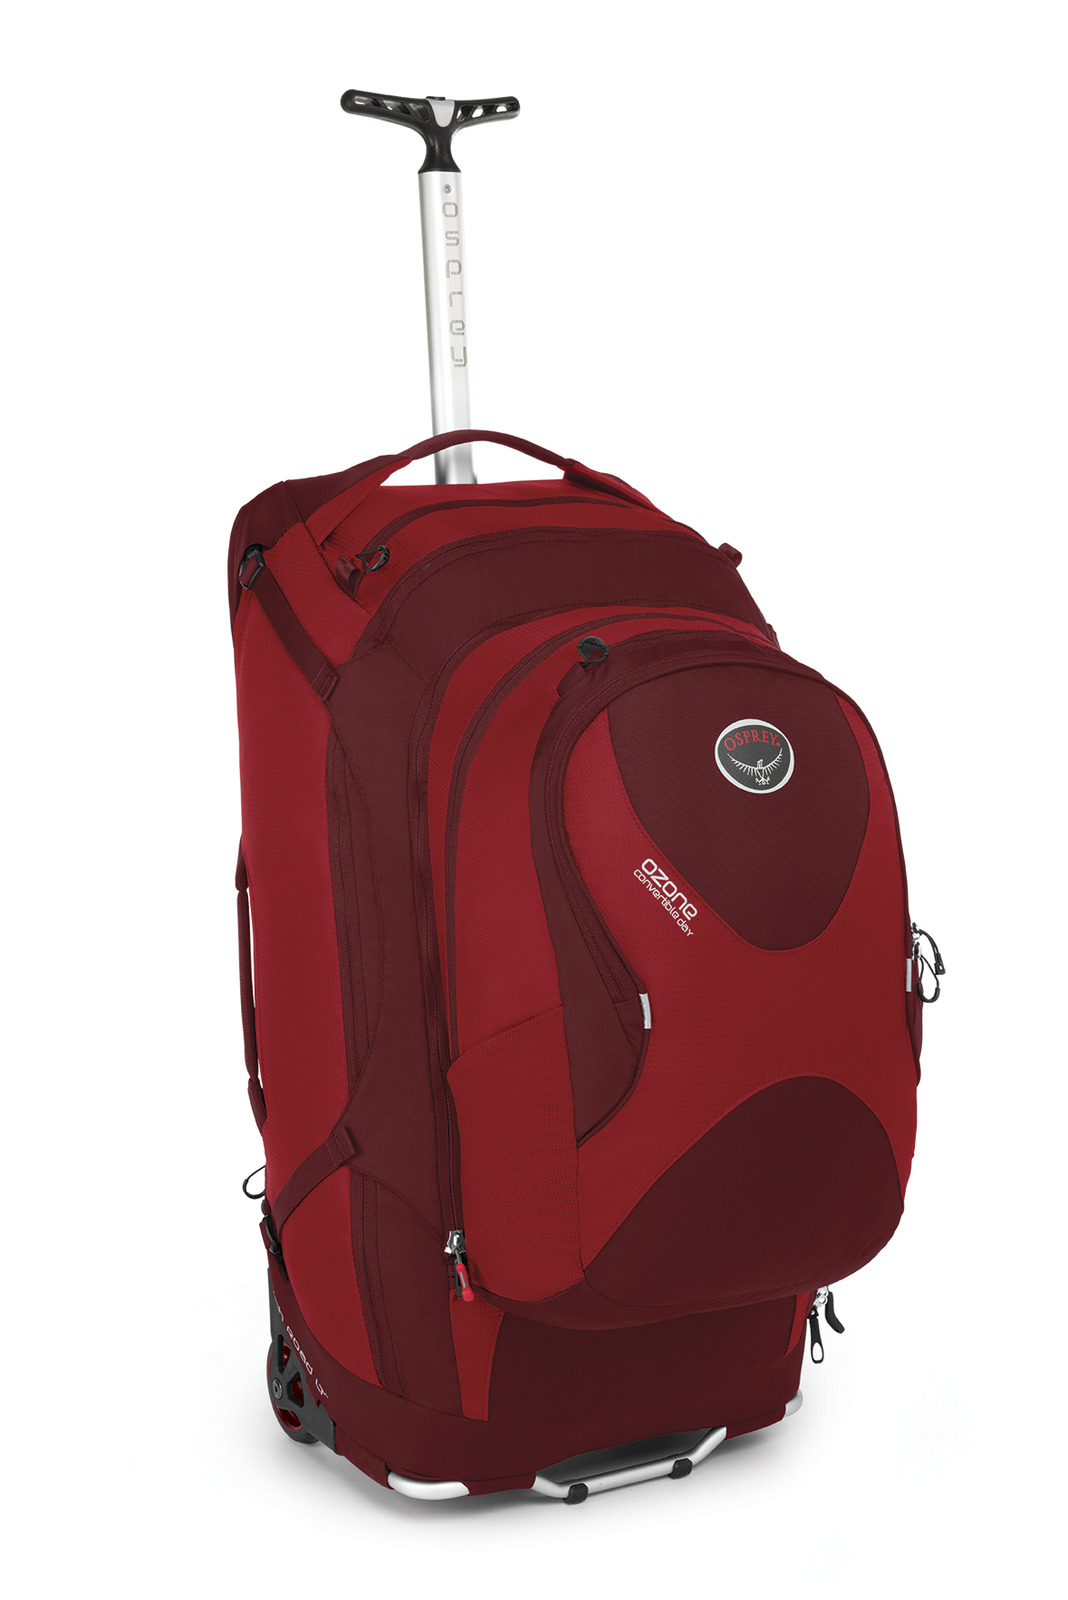 red backpack for travel